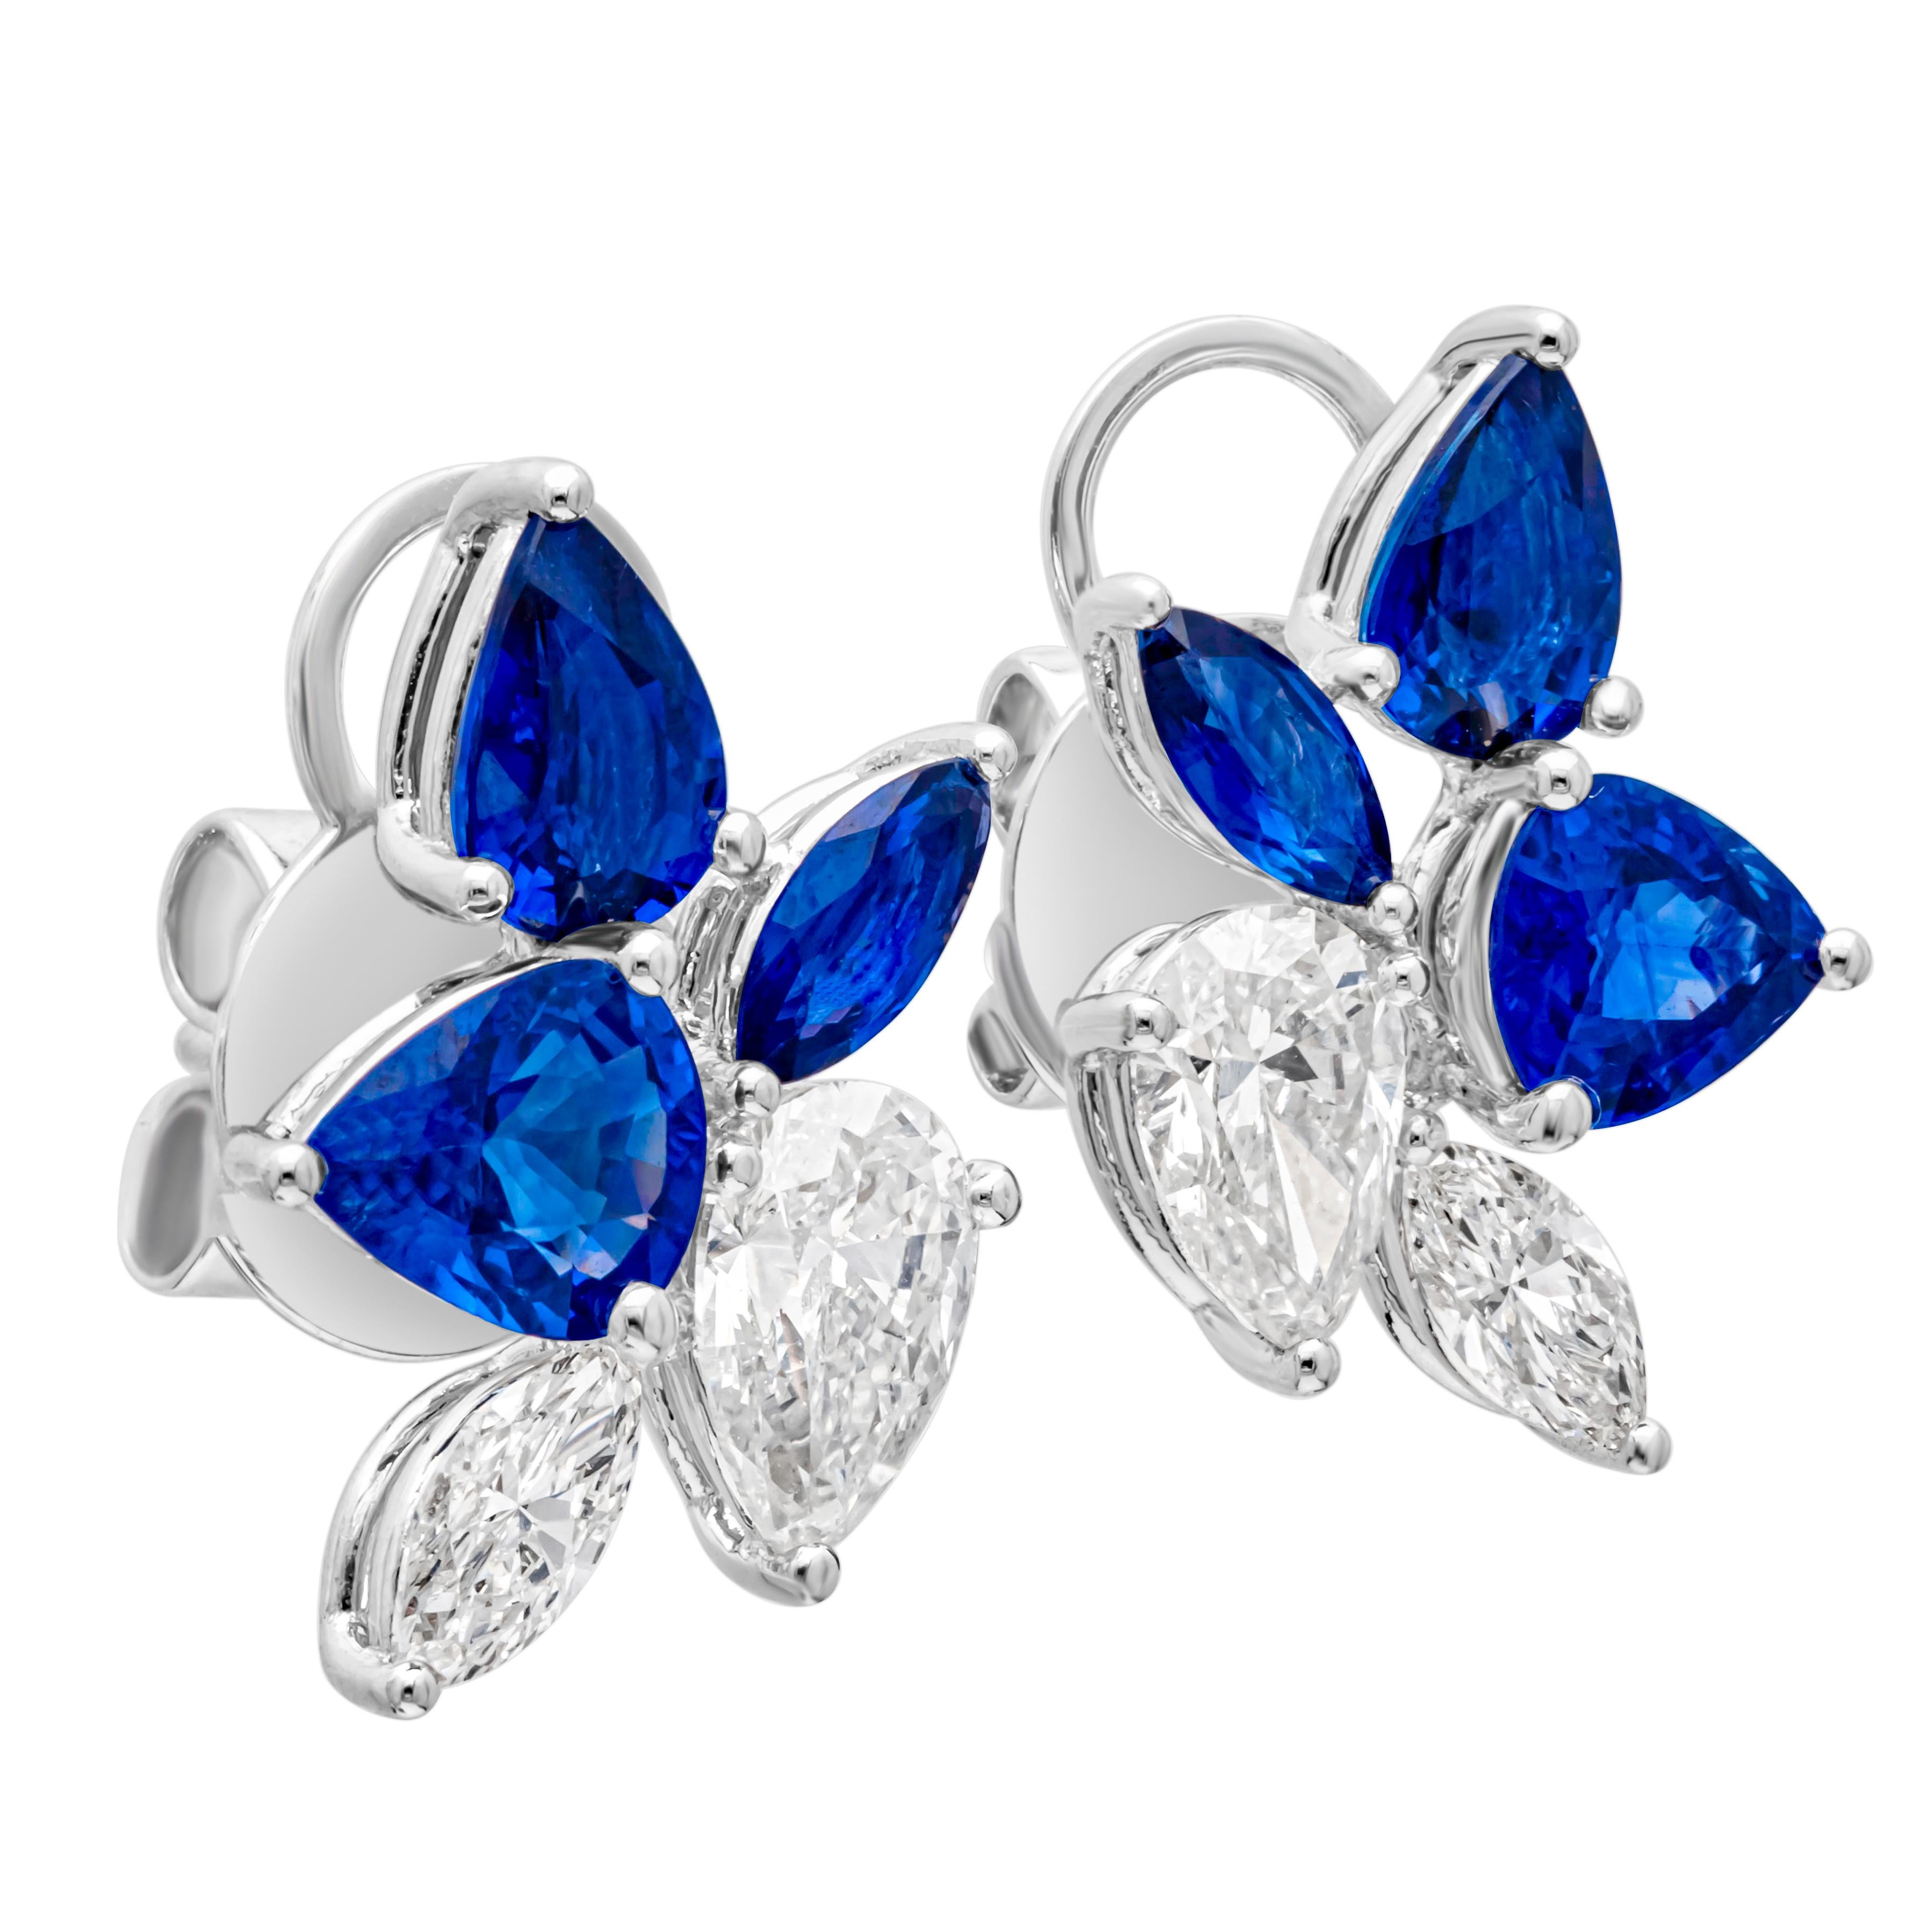 Contemporary 4.08 Carats Total Mixed Cut Blue Sapphire & Diamond Stud Earrings For Sale